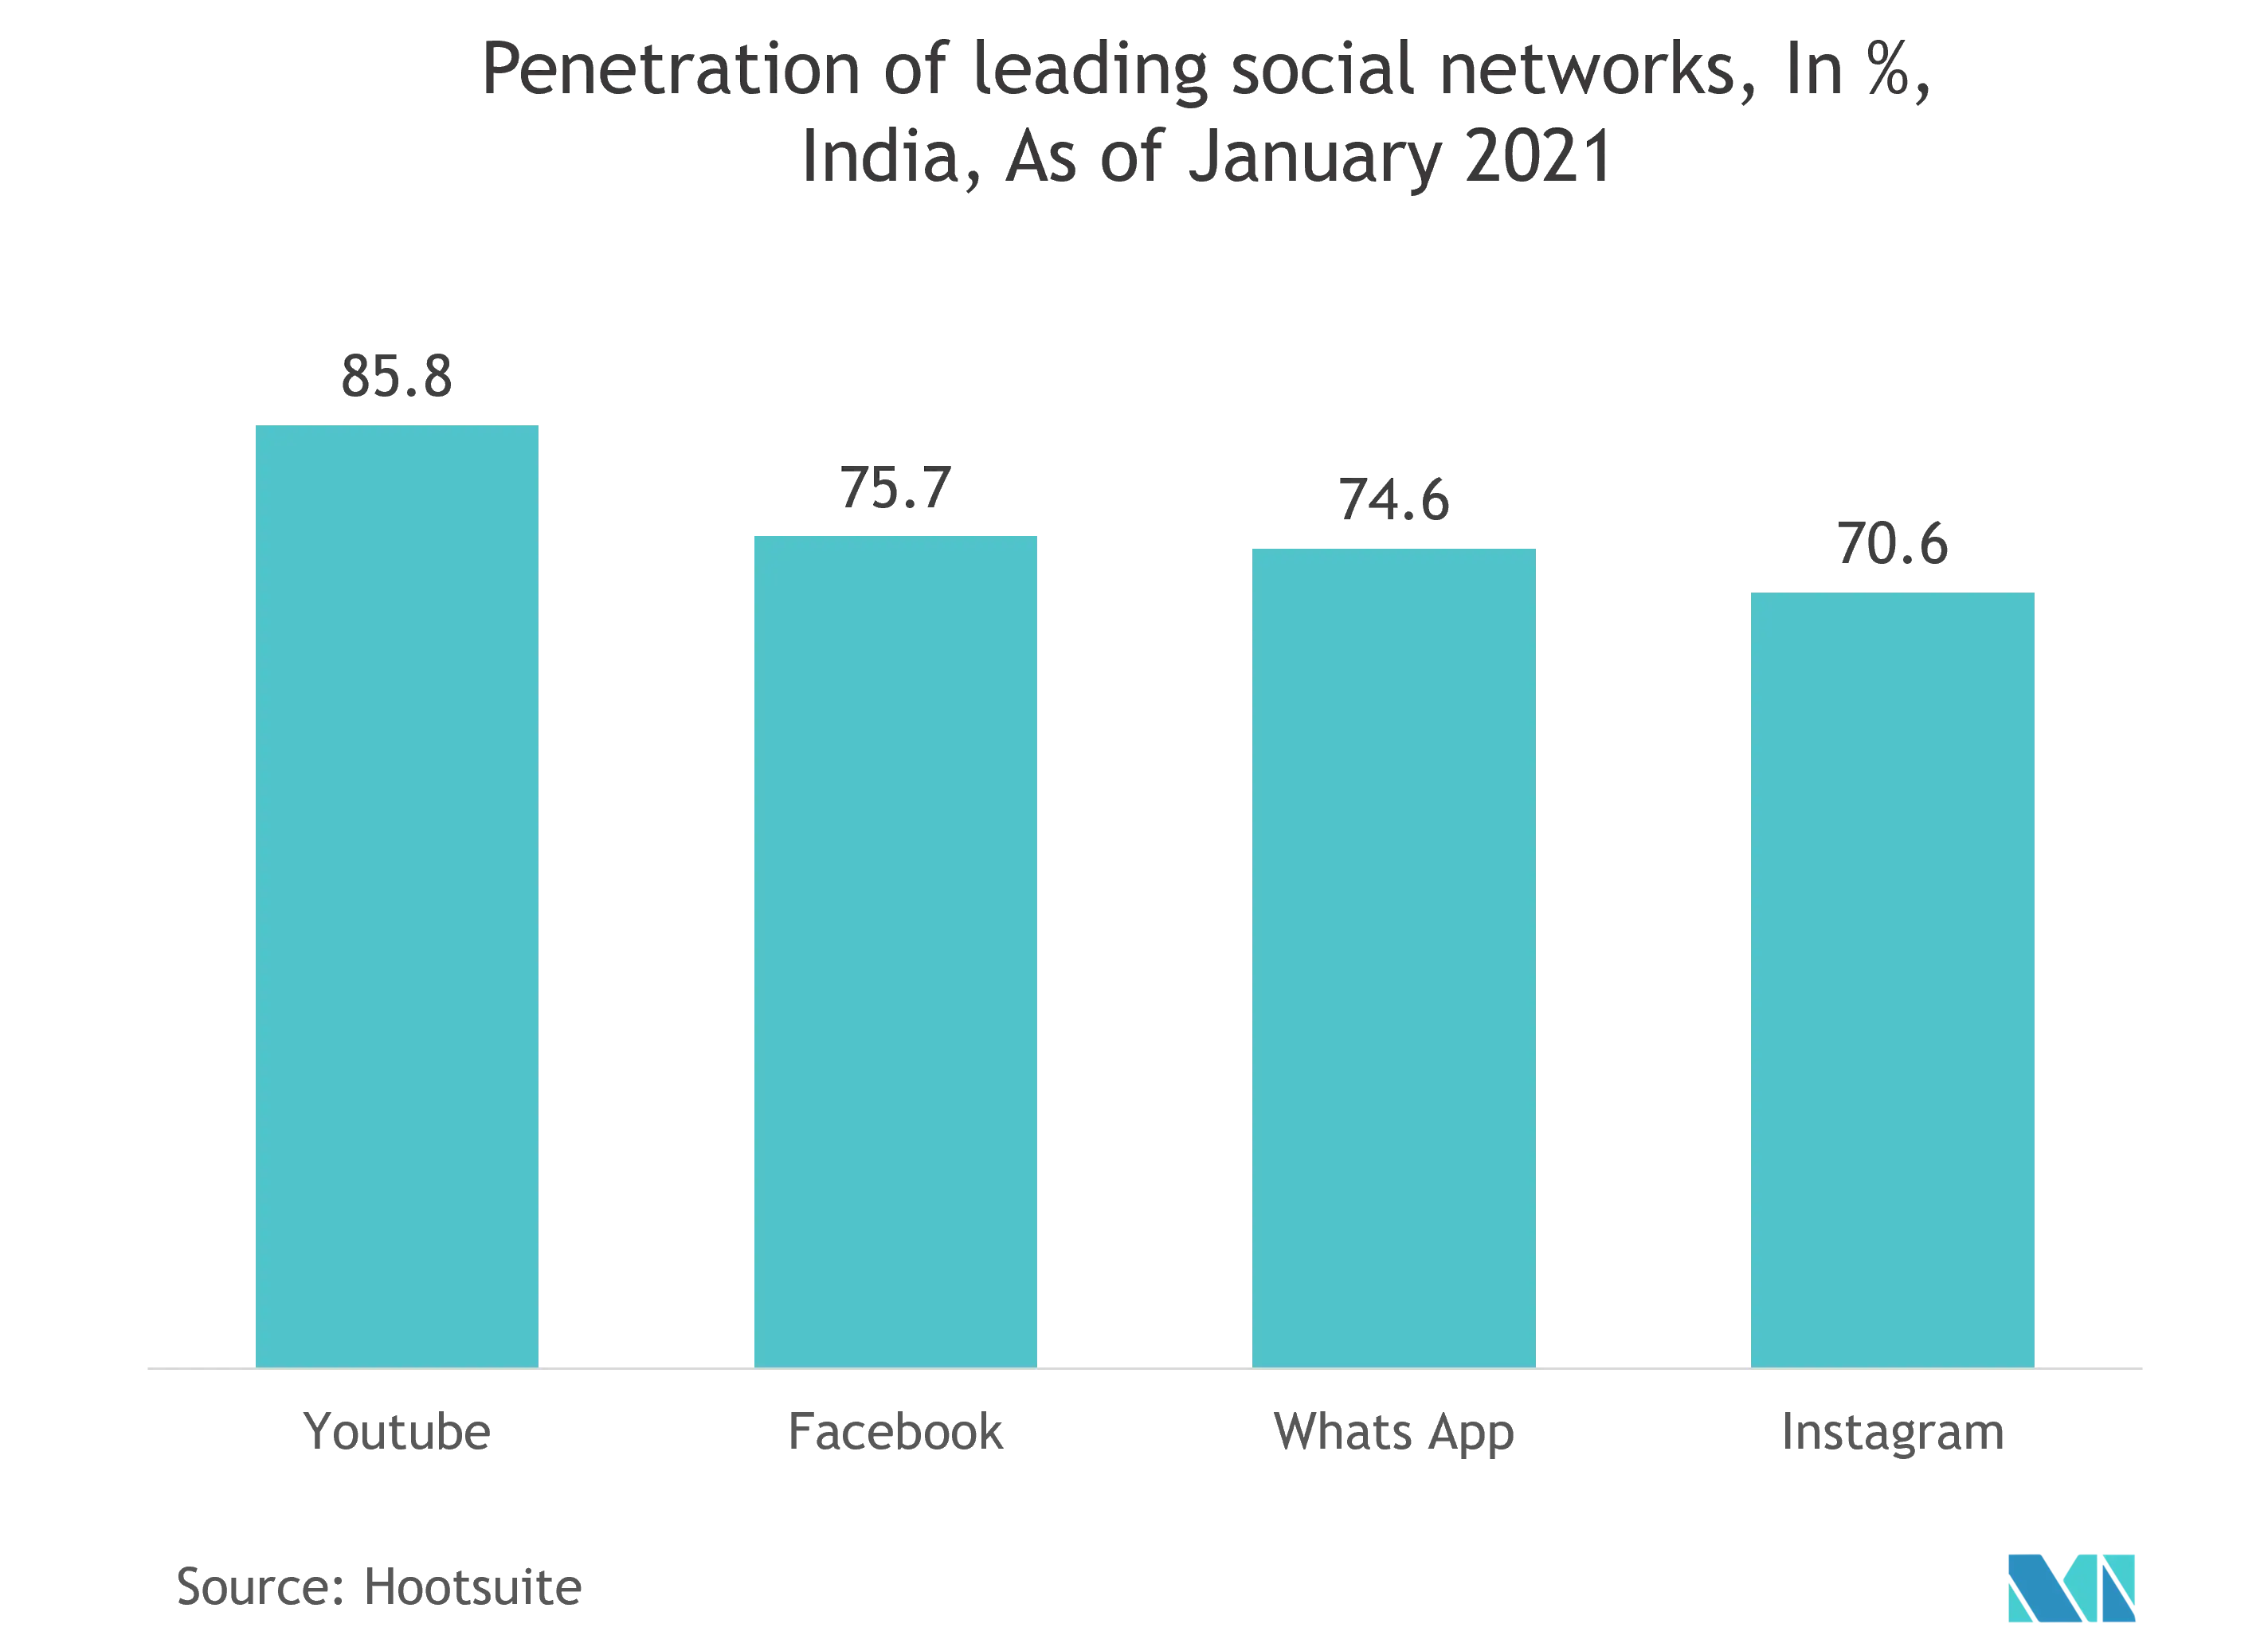 India Musical Instrument Market: Penetration of leading social networks, In %, India, As of January 2021